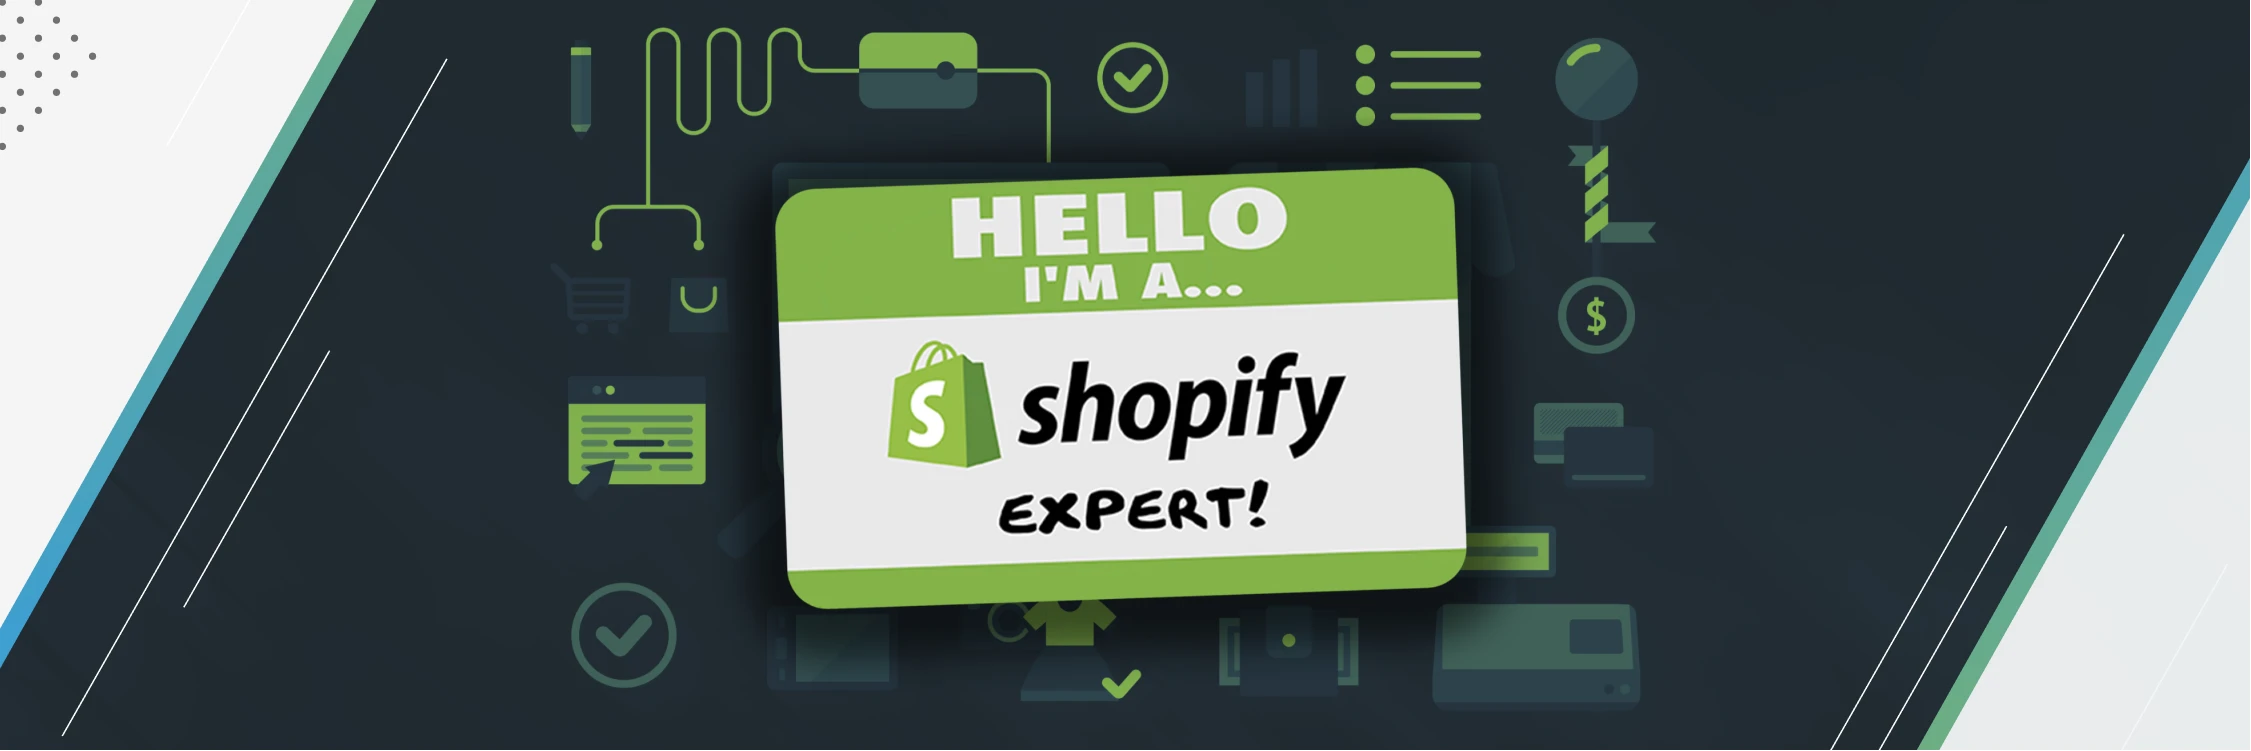 How to Become a Shopify Expert — Plus 10 Shopify Experts to Follow